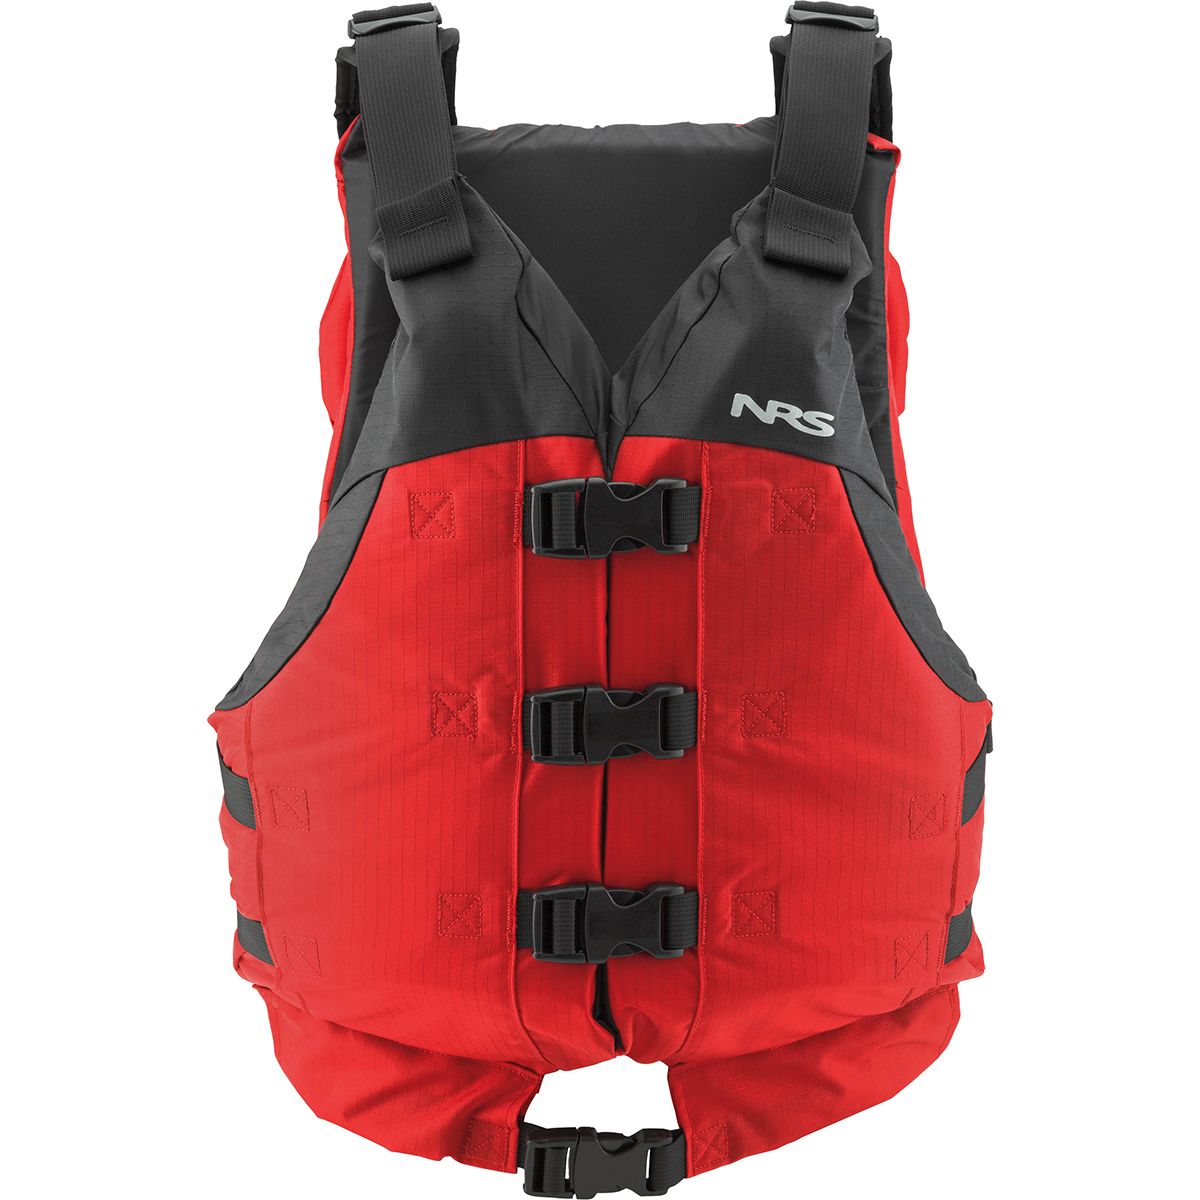 NRS Big Water V Personal Flotation Device